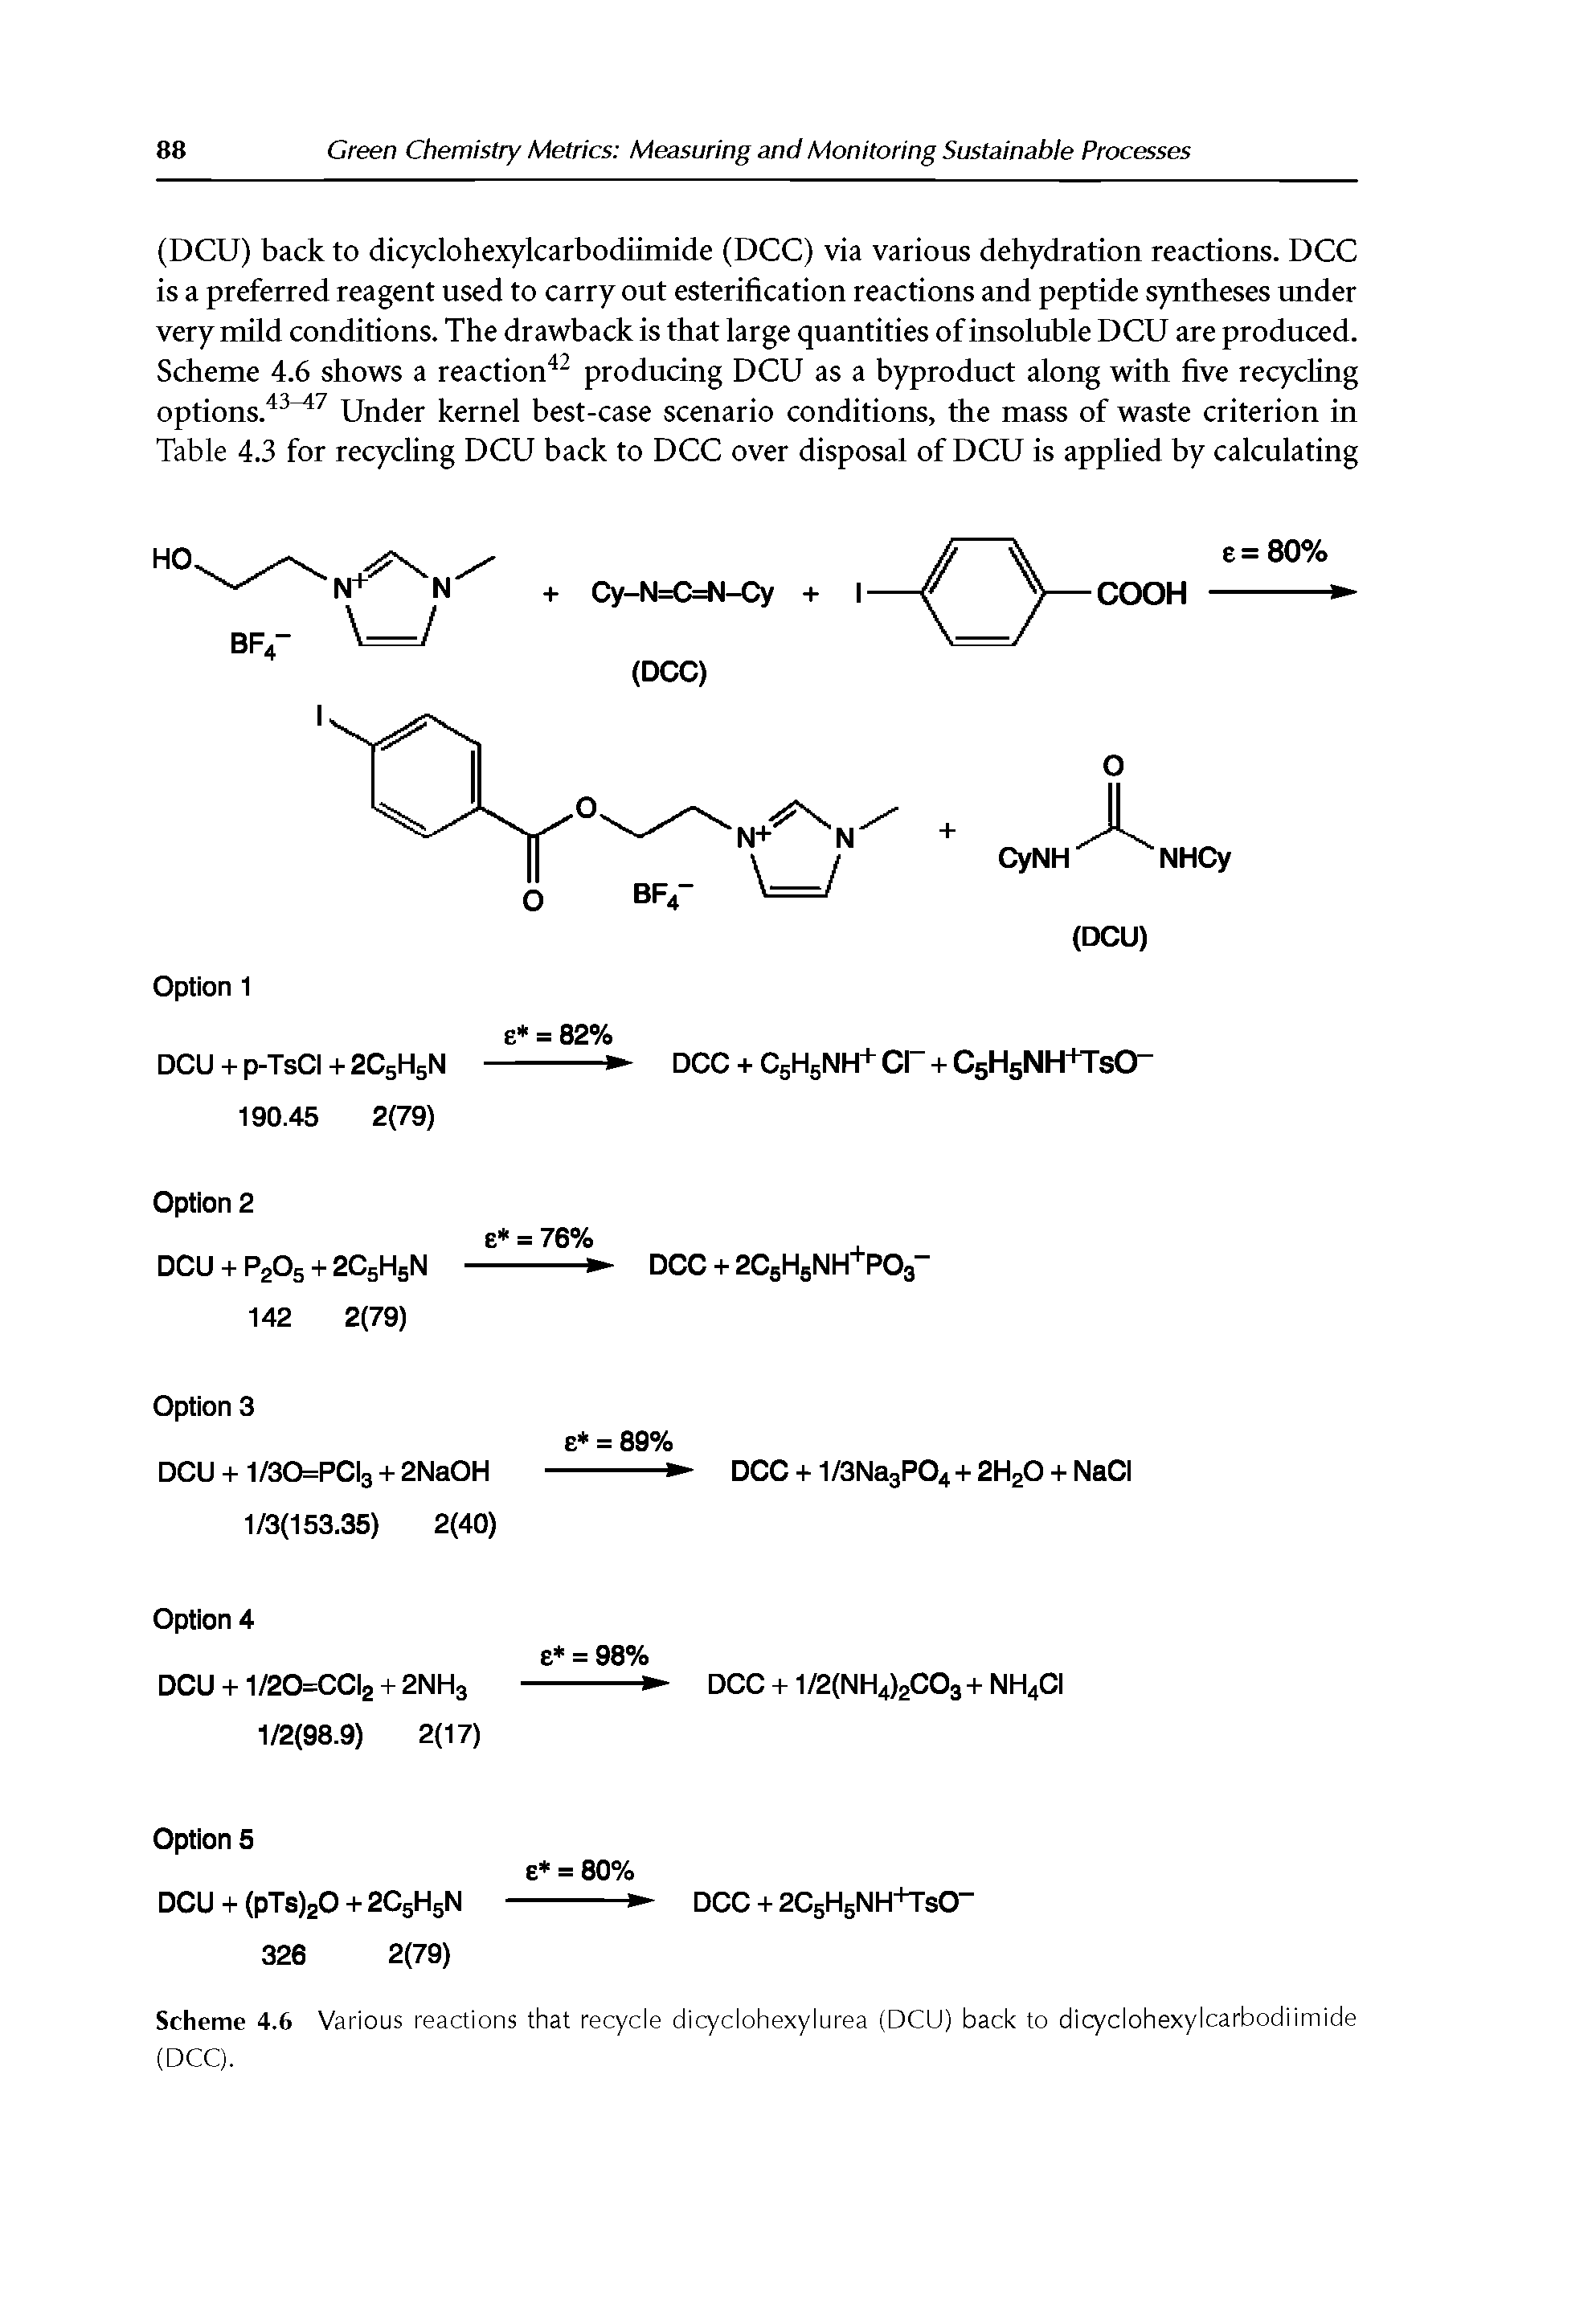 Scheme 4.6 Various reactions that recycle dicyclohexylurea (DCU) back to dicyclohexylcarbodiimide (DCC).